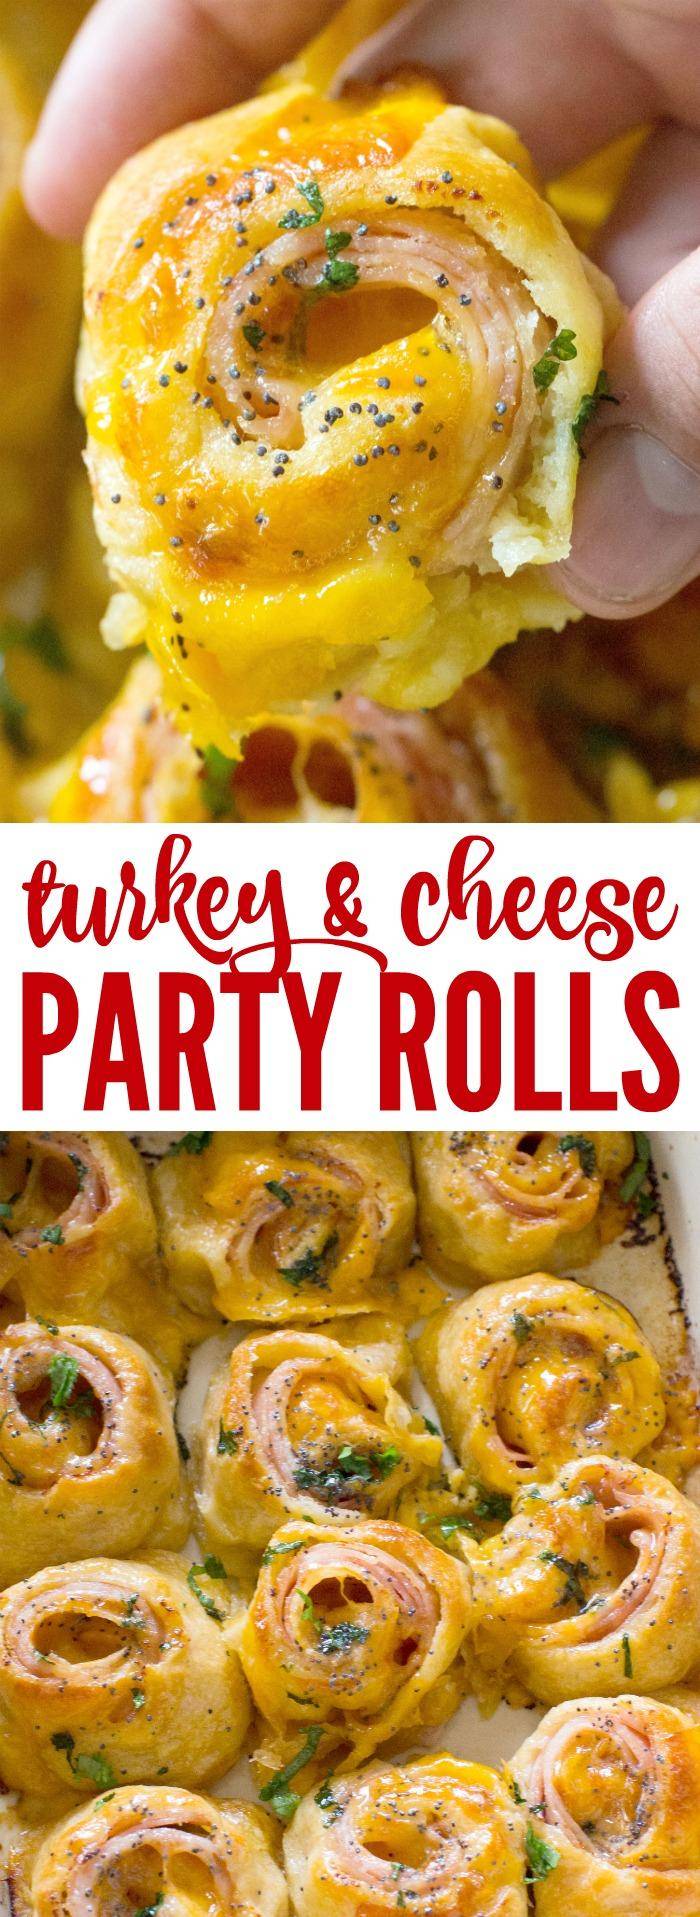 Hot Turkey and Cheese Party Rolls! - Passion for Savings